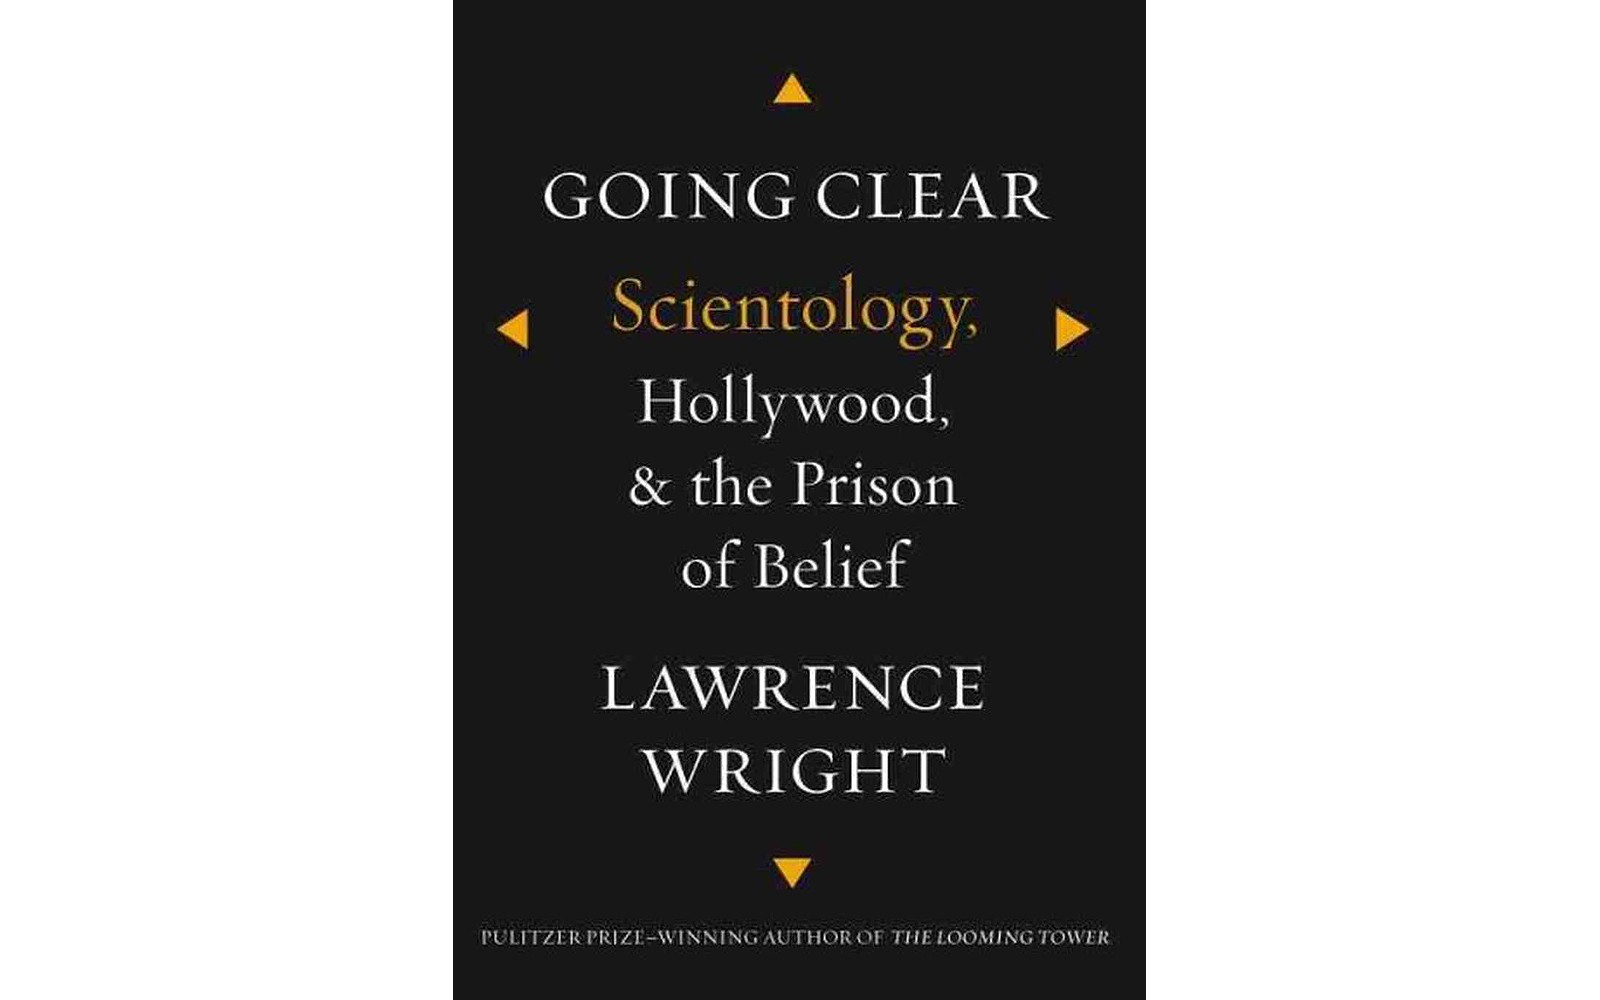 Going Clear: Scientology, Hollywood and the Prison of Belief - BY LAWRENCE WRIGHT - KNOPF